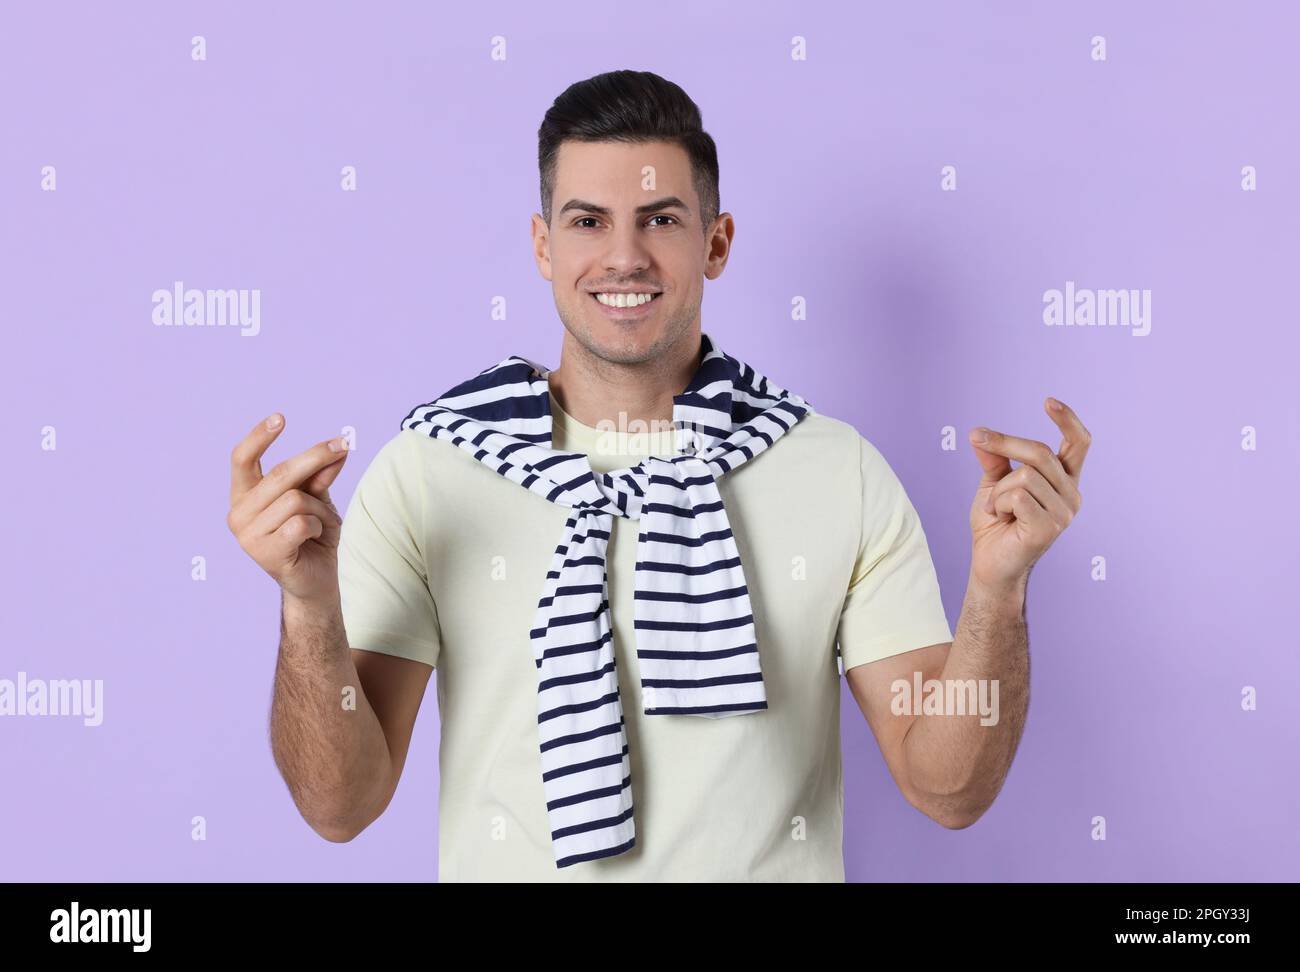 Handsome man snapping fingers on violet background Stock Photo